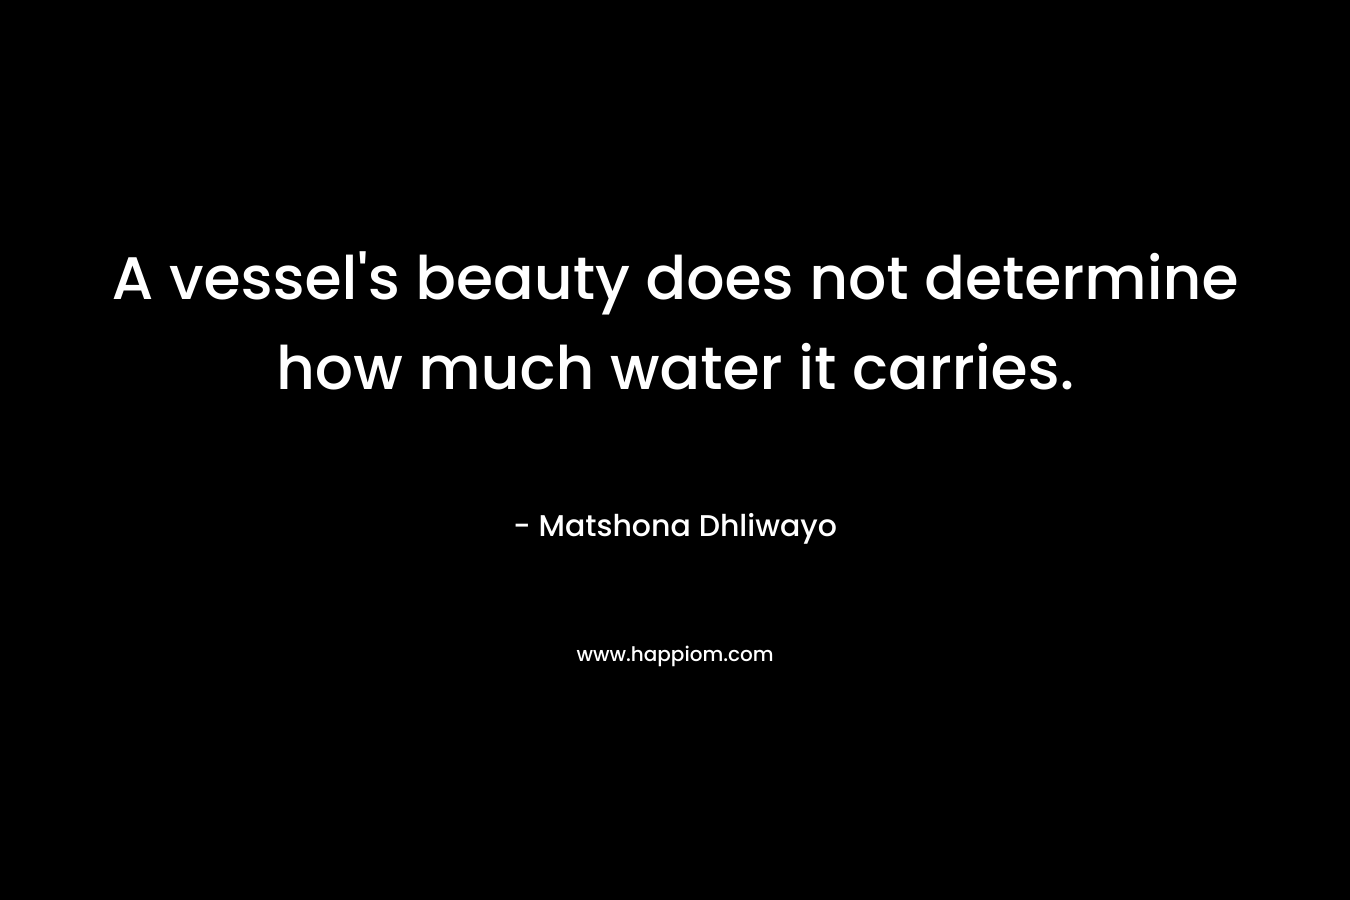 A vessel's beauty does not determine how much water it carries.